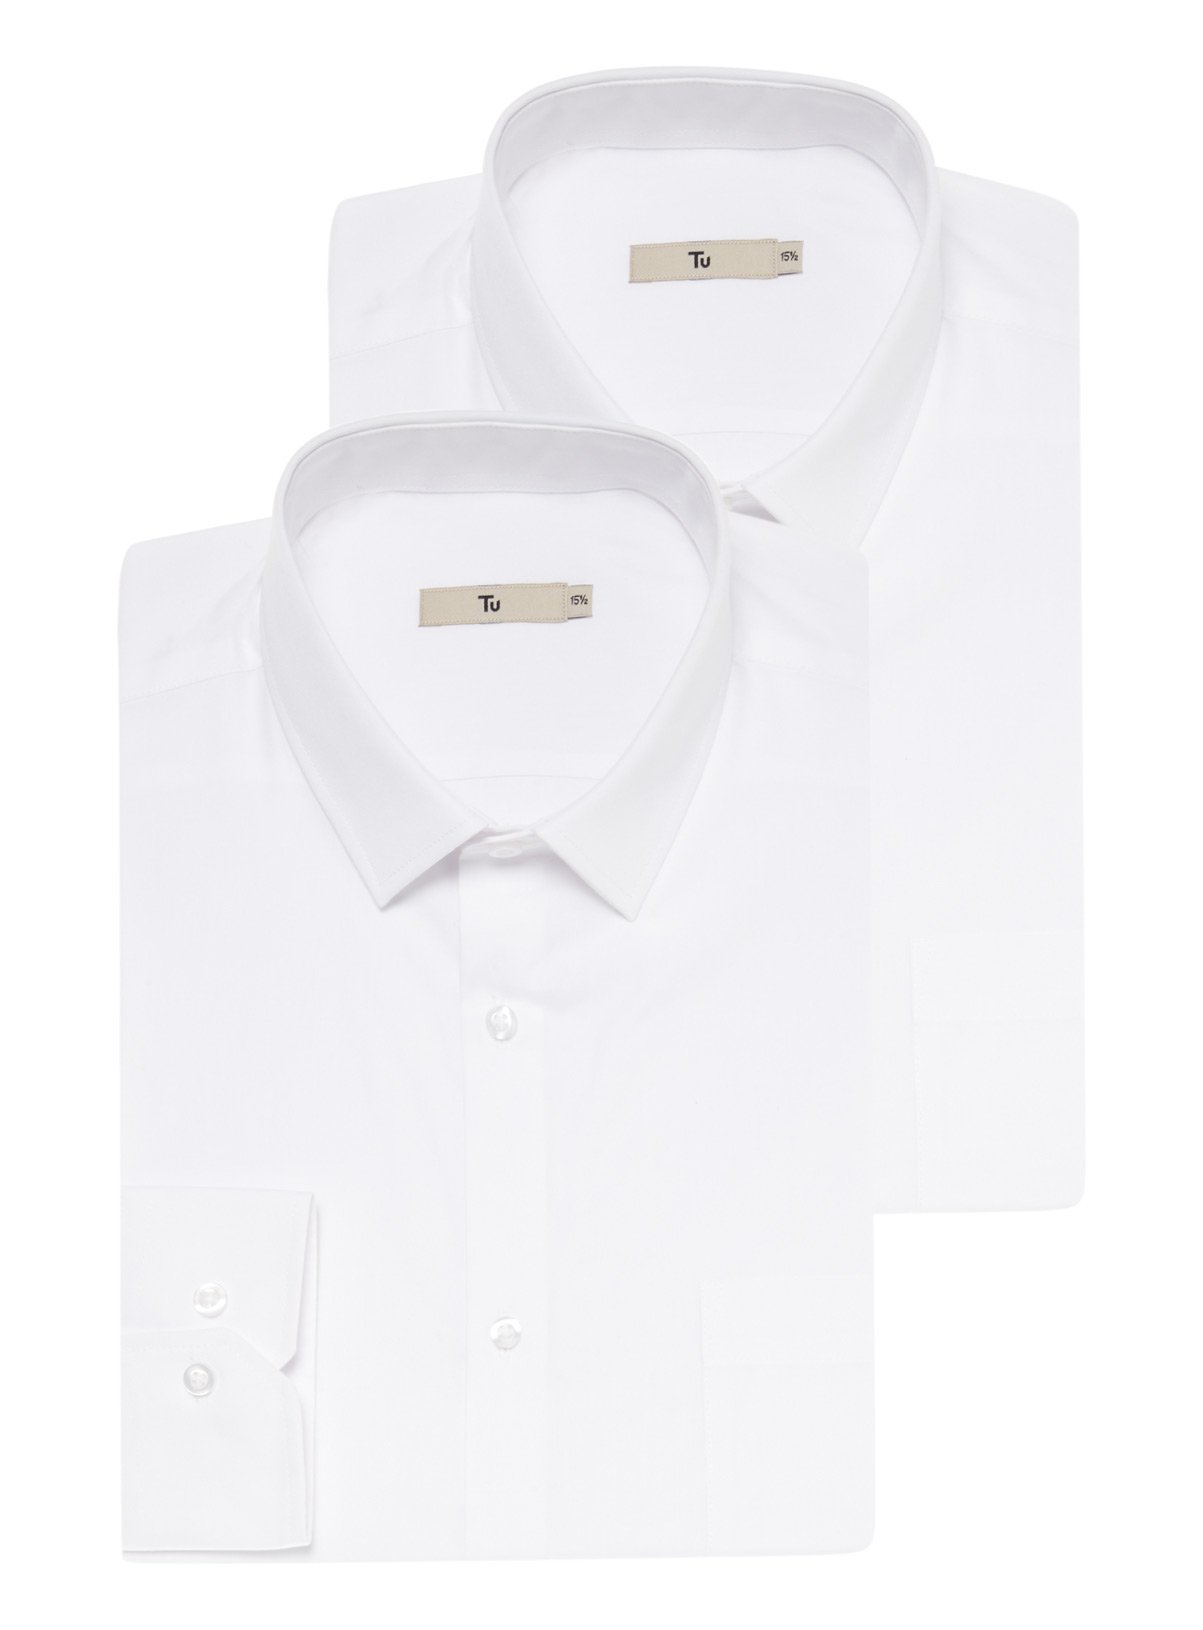 White Tailored Fit Long Sleeve Easy Iron Shirt 2 Pack Review